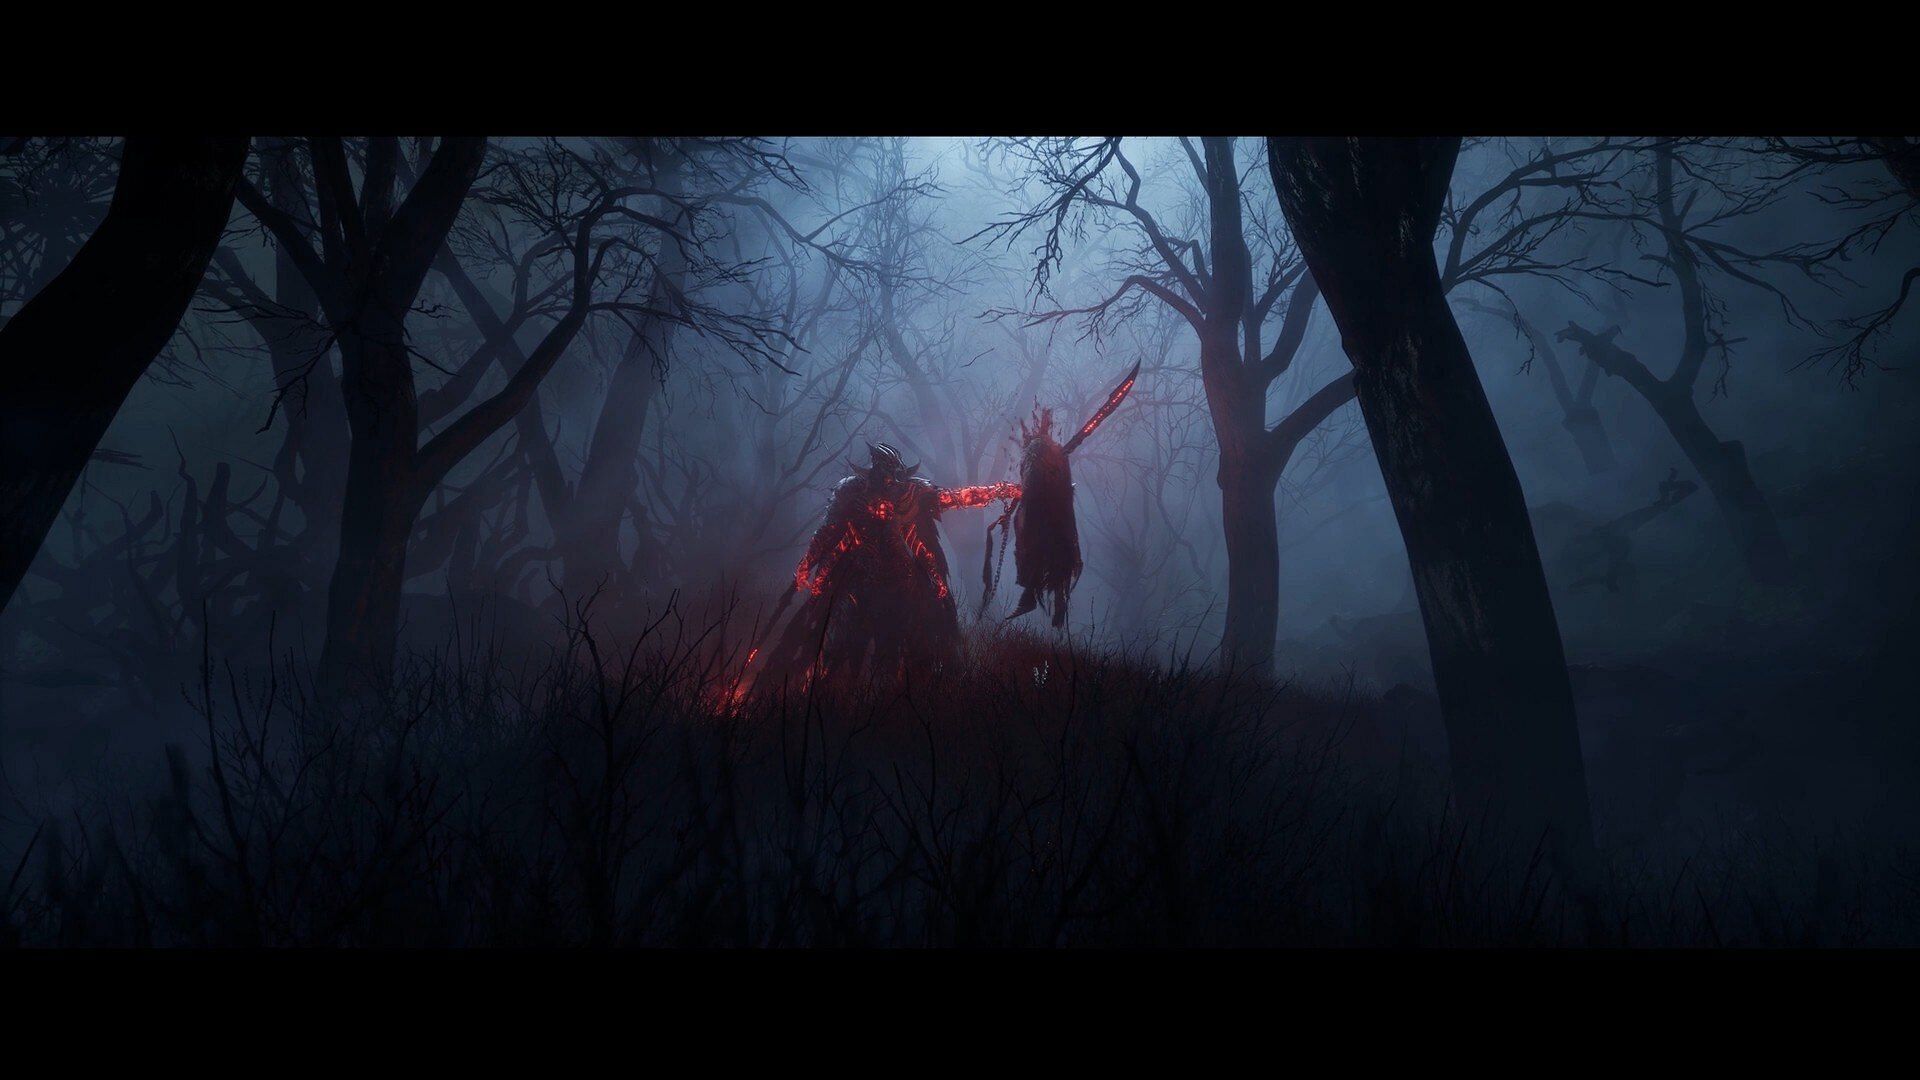 The story embraces its dark fantasy roots. (Image via CI Games)